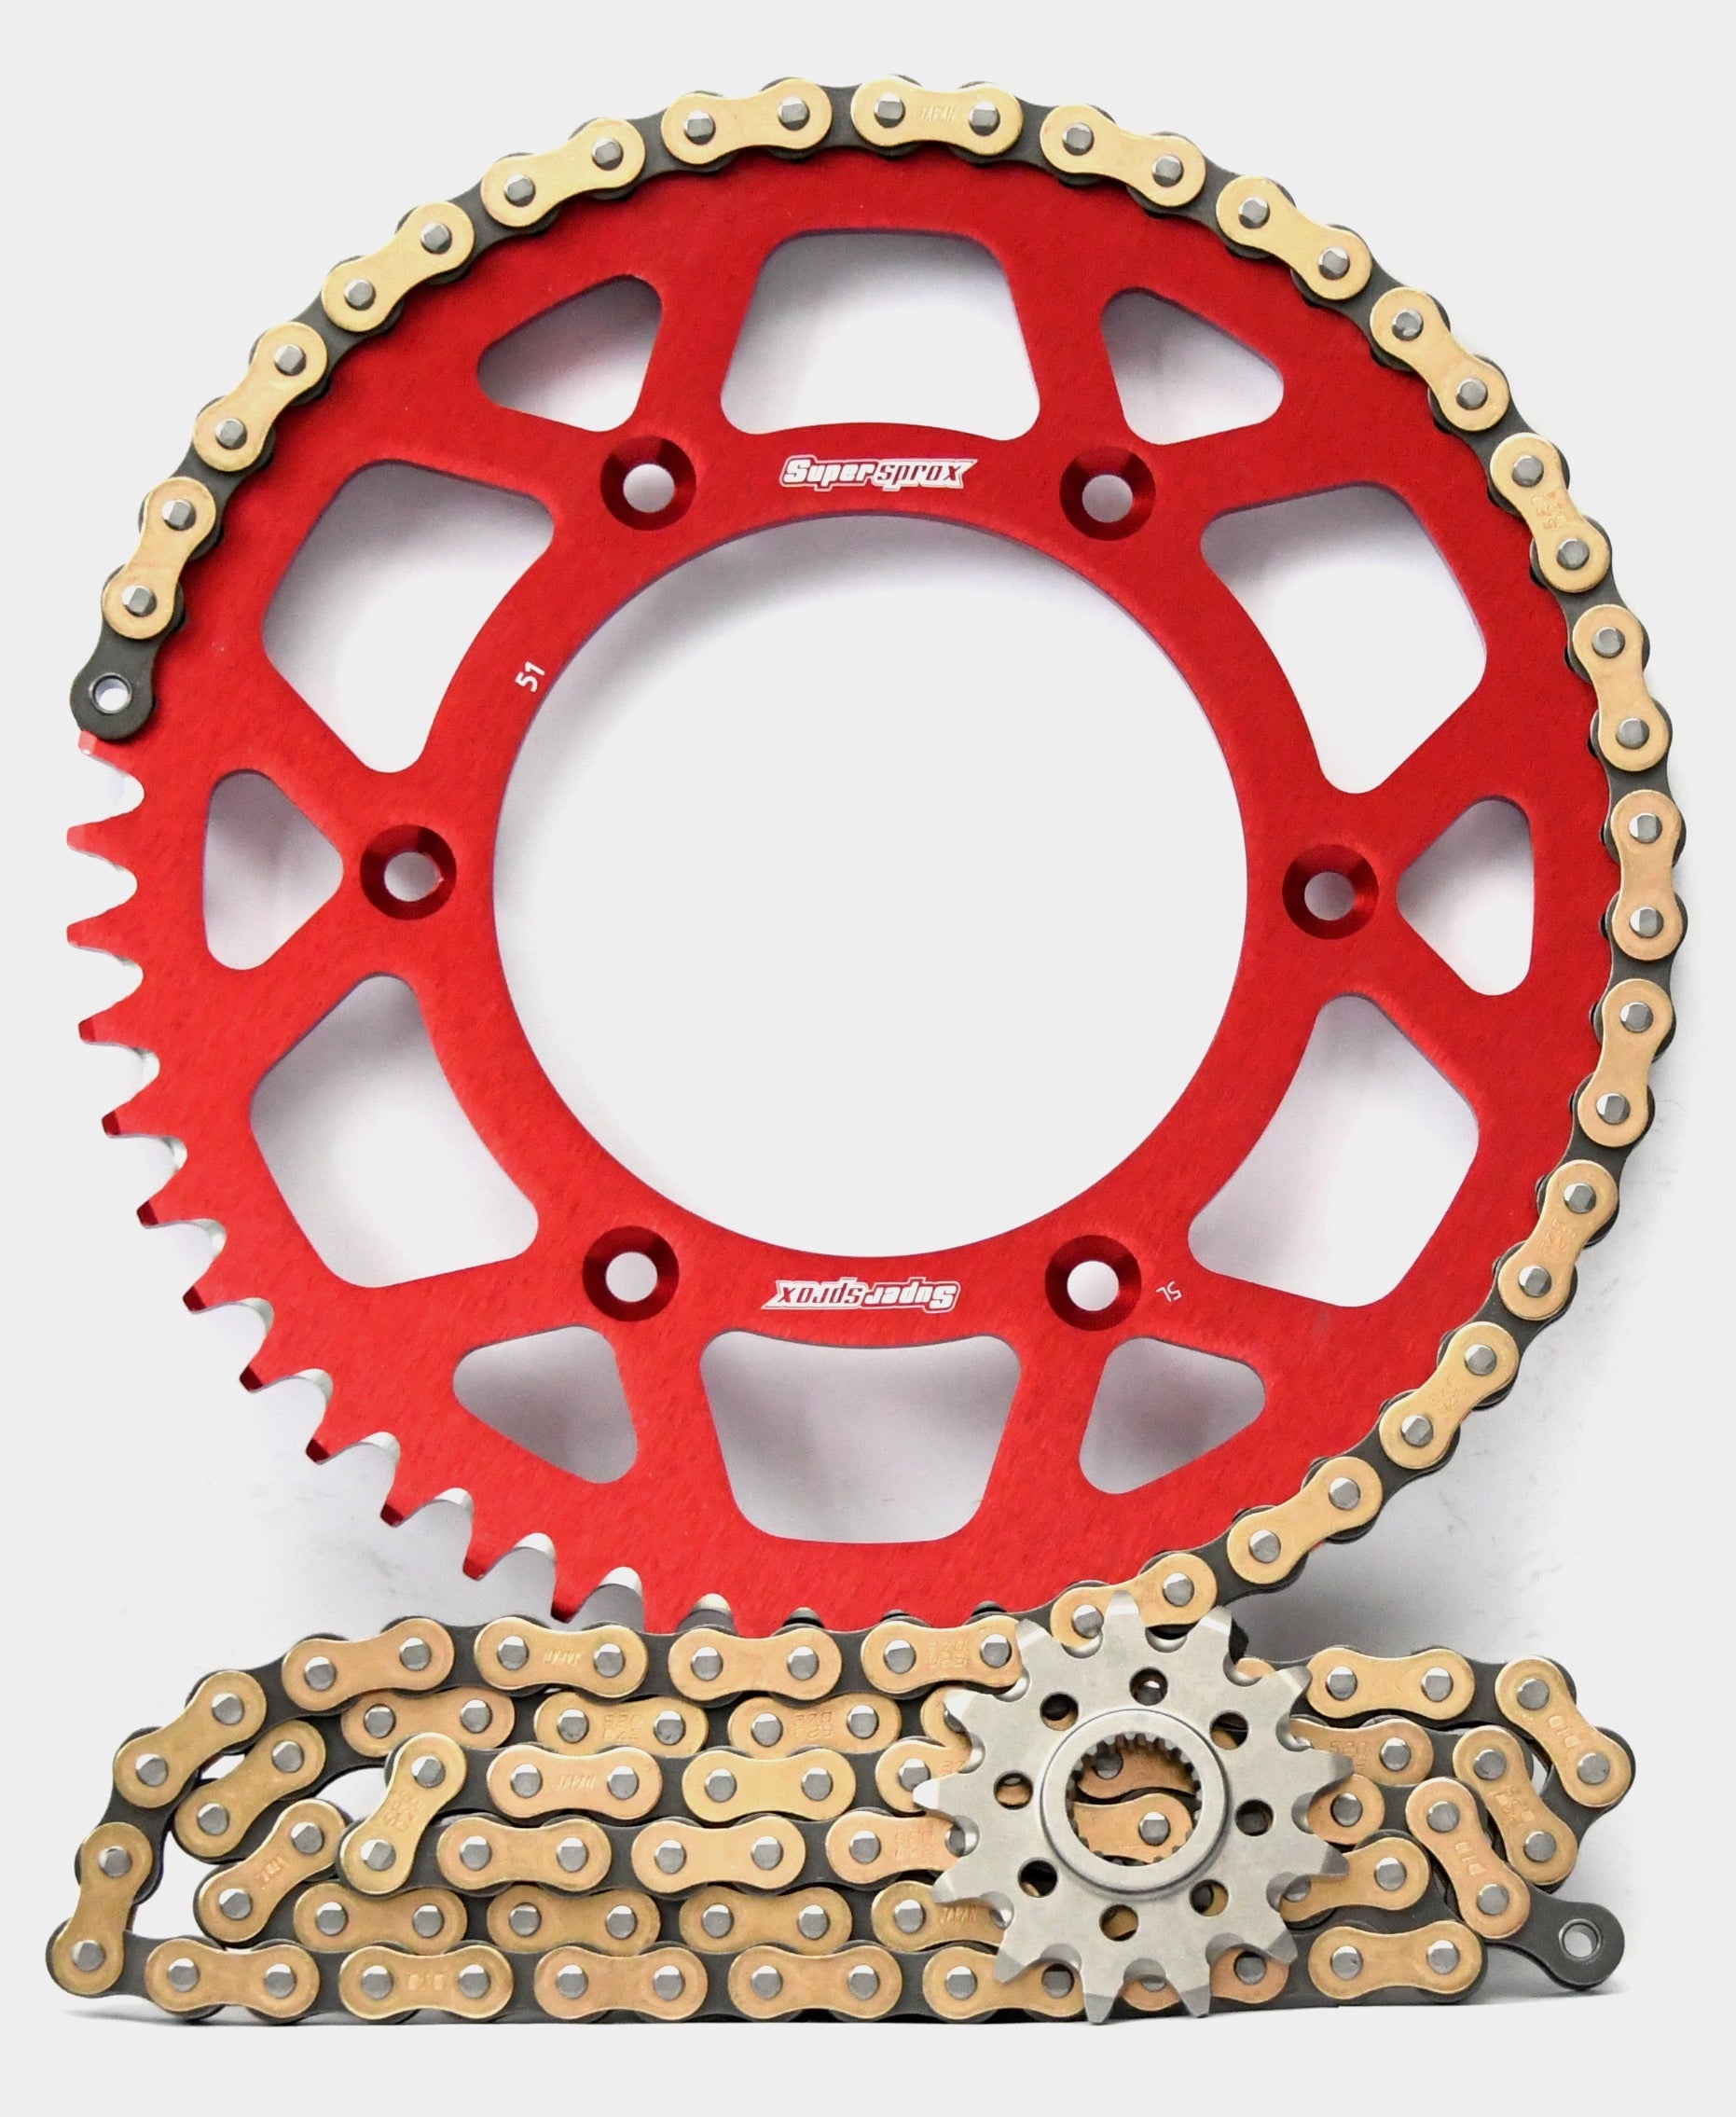 Supersprox Chain & Aluminium Sprocket Kit for Honda CR125R 1998-2003 - Choose Your Gearing - 0